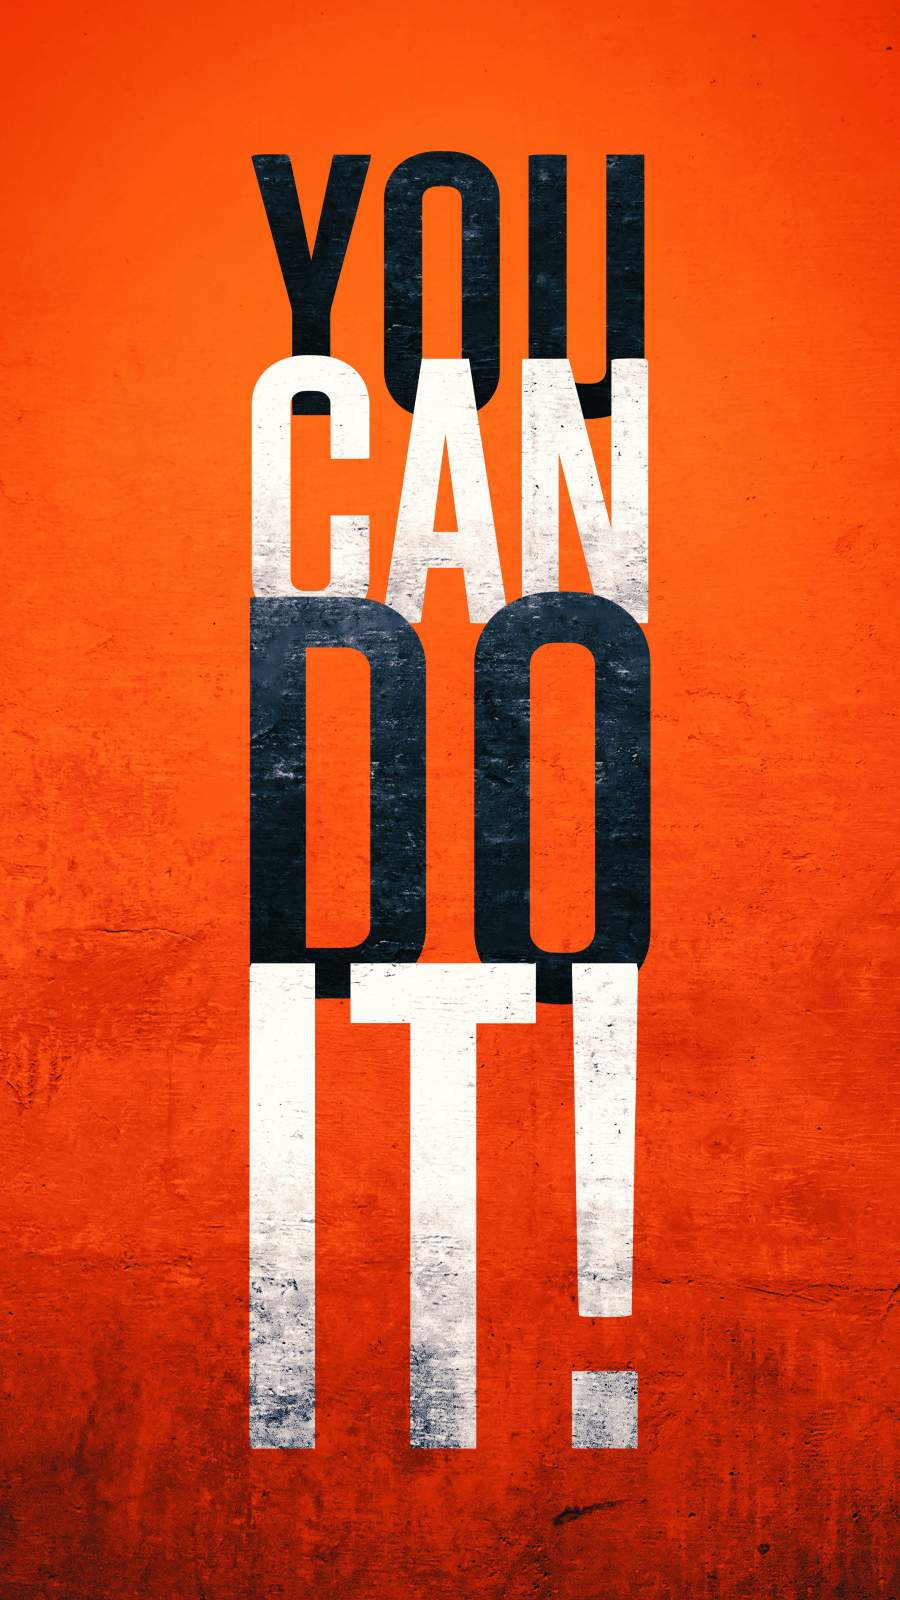 Do It Wallpapers